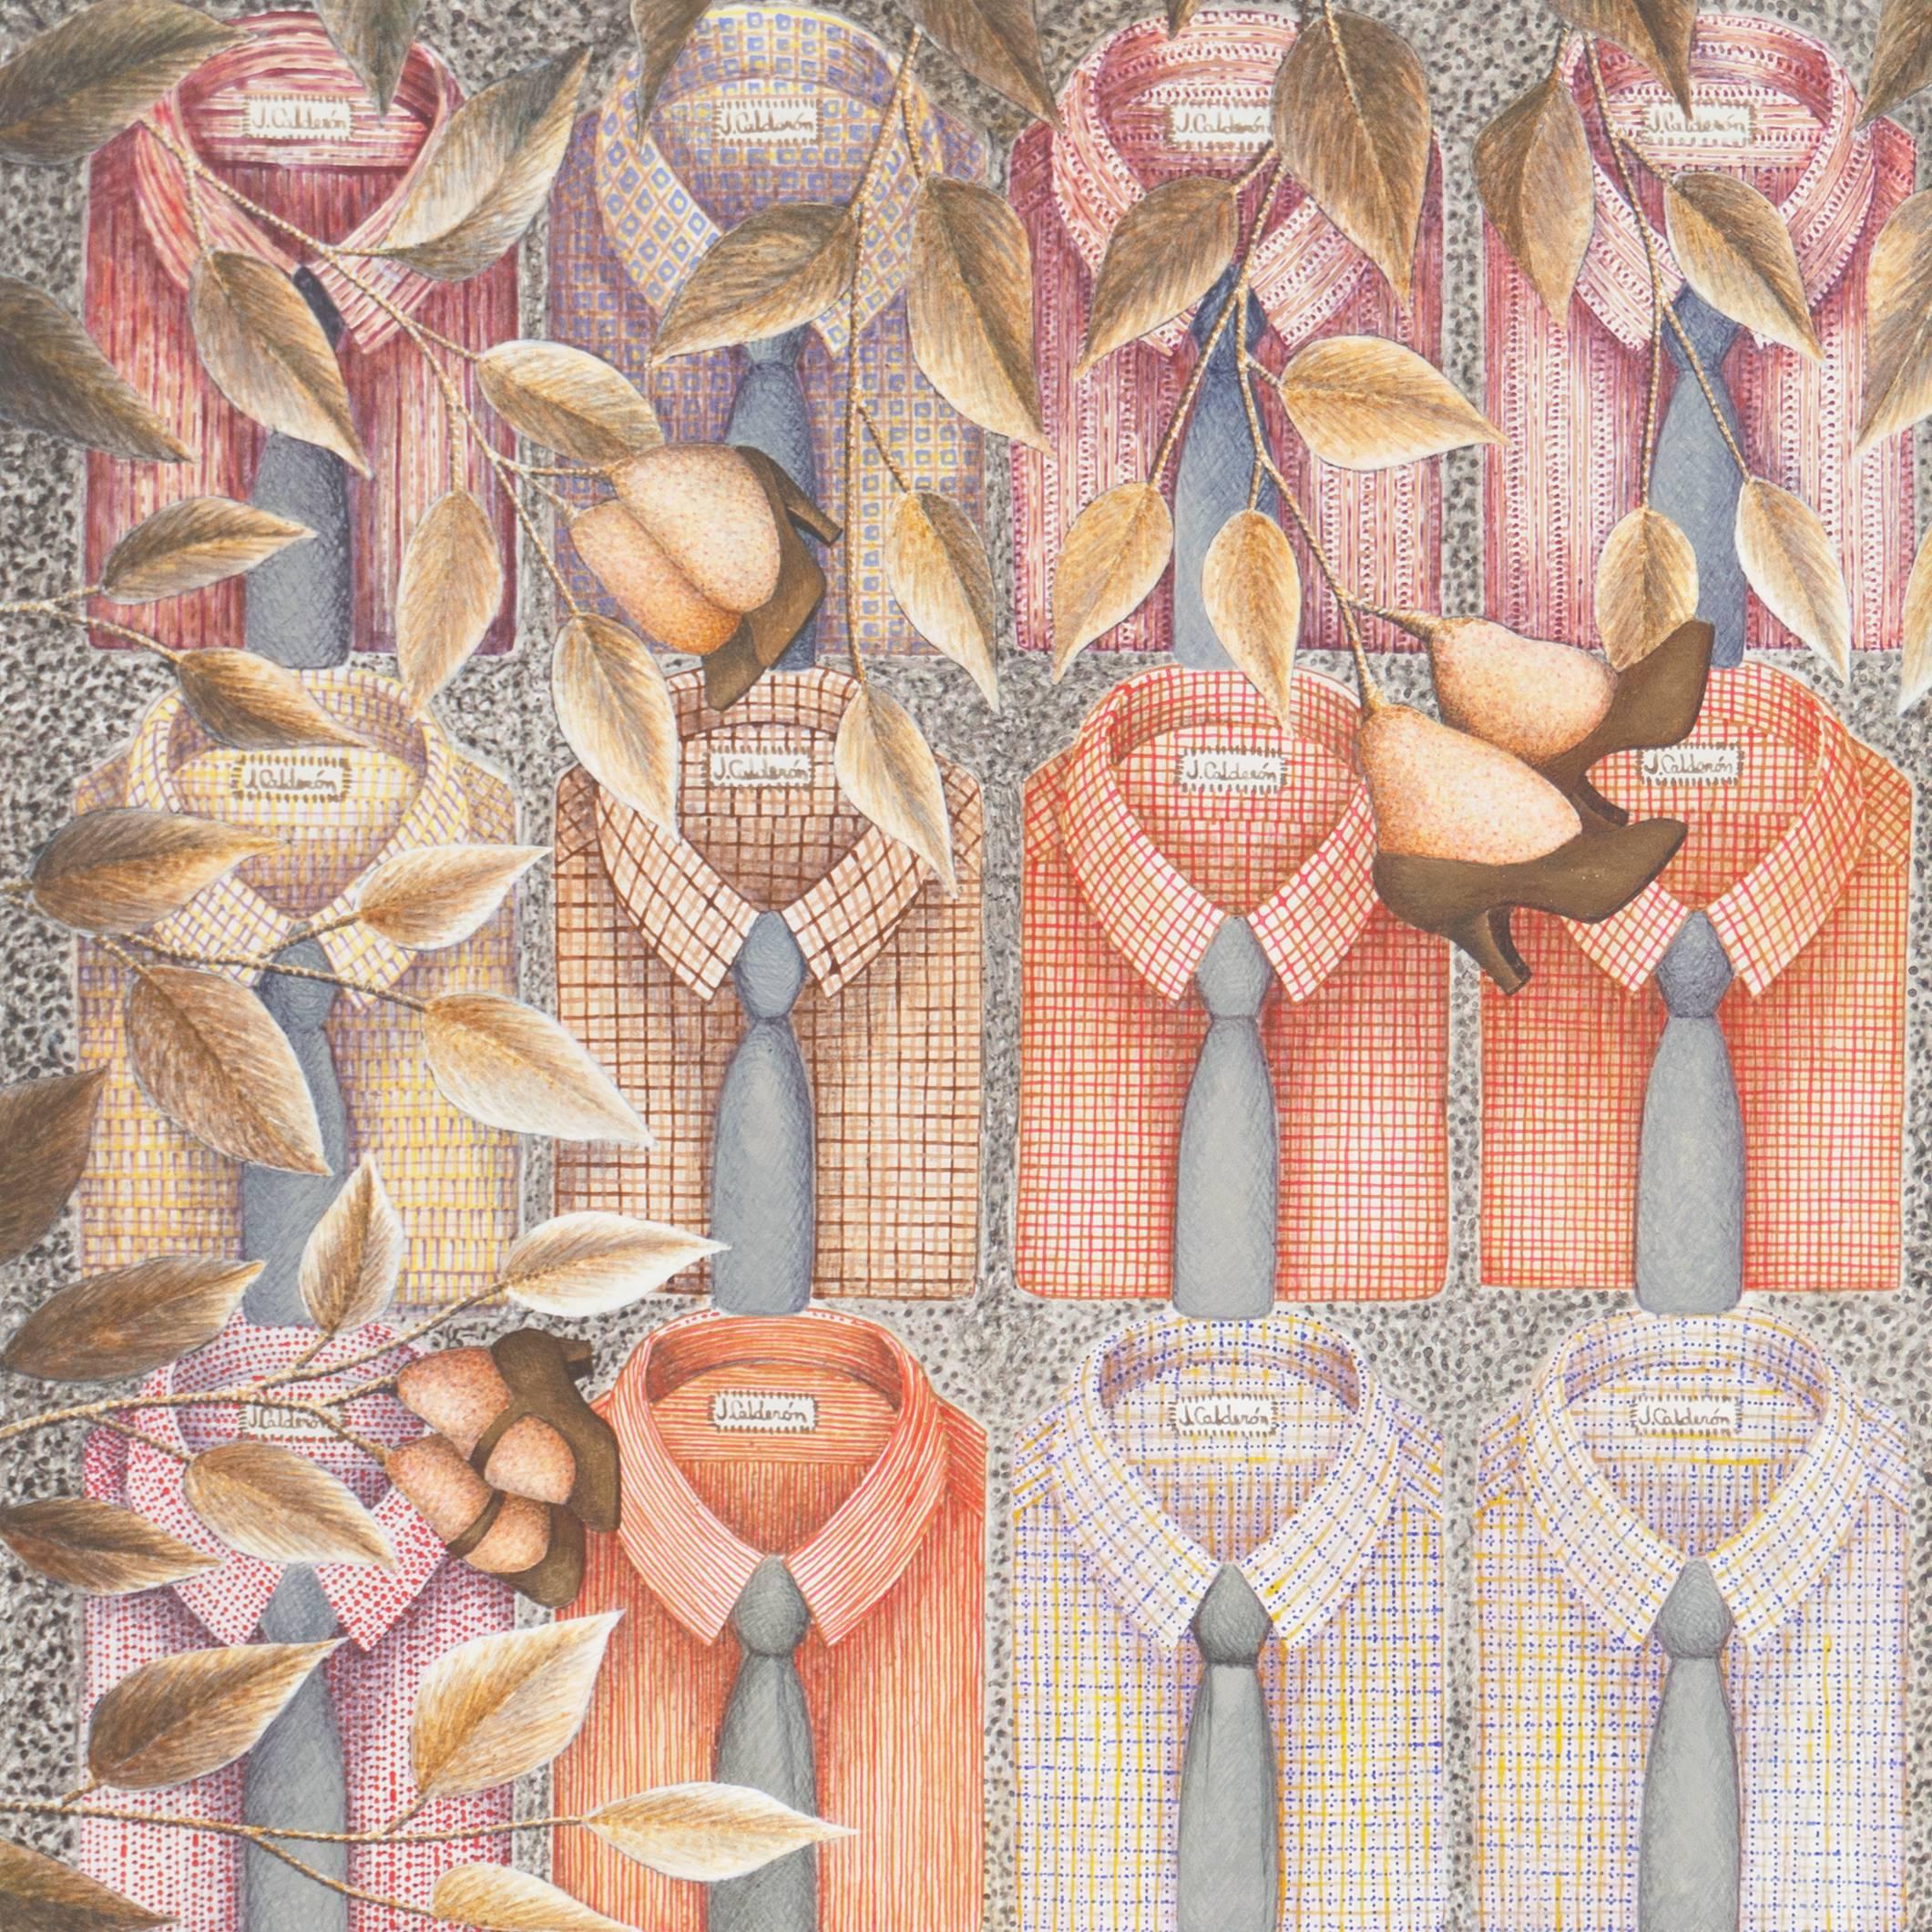 Surrealist Fashion Painting with Dress Shirts and High Heel Shoes 1